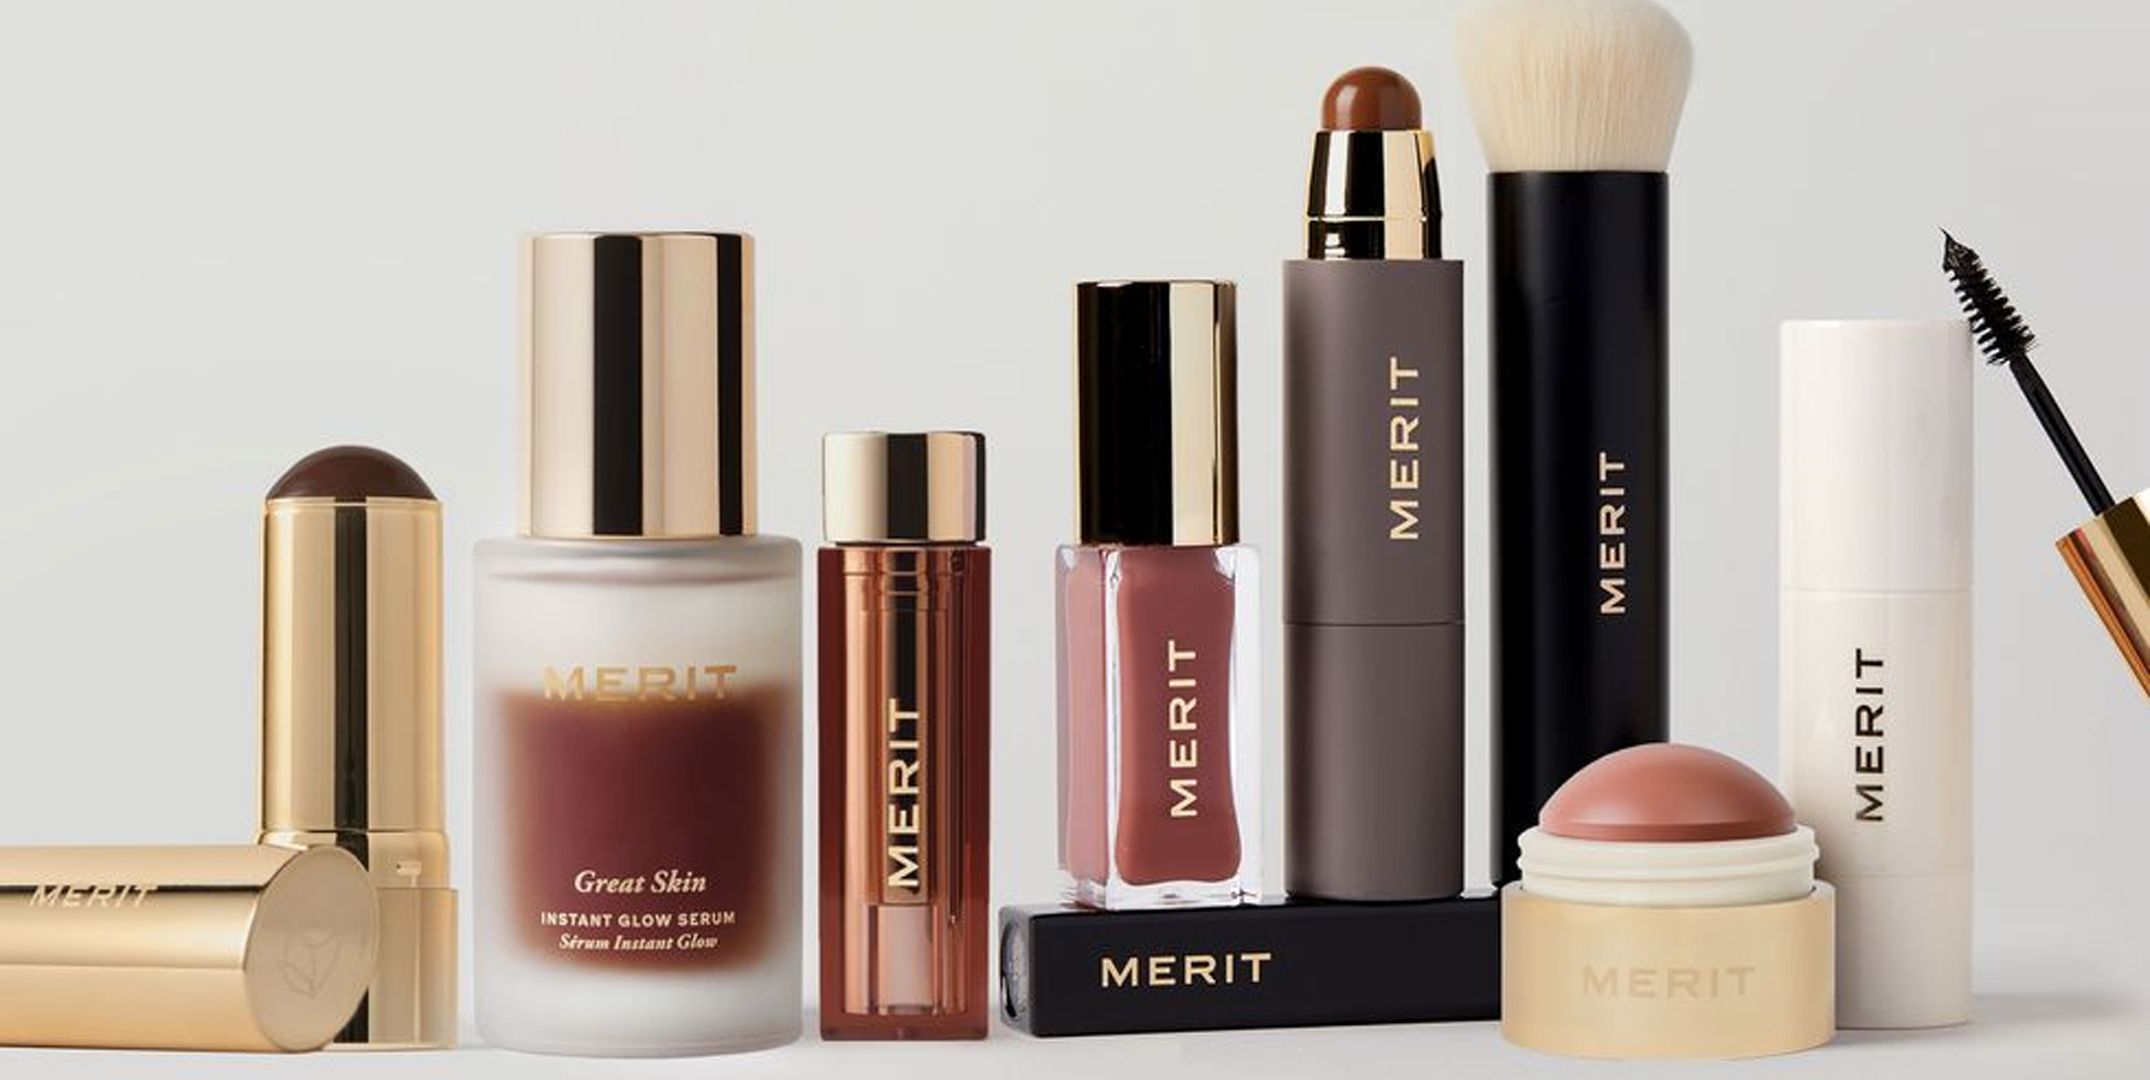 Merit's Day Glow is the glossy highlighter to deliver a summer glow